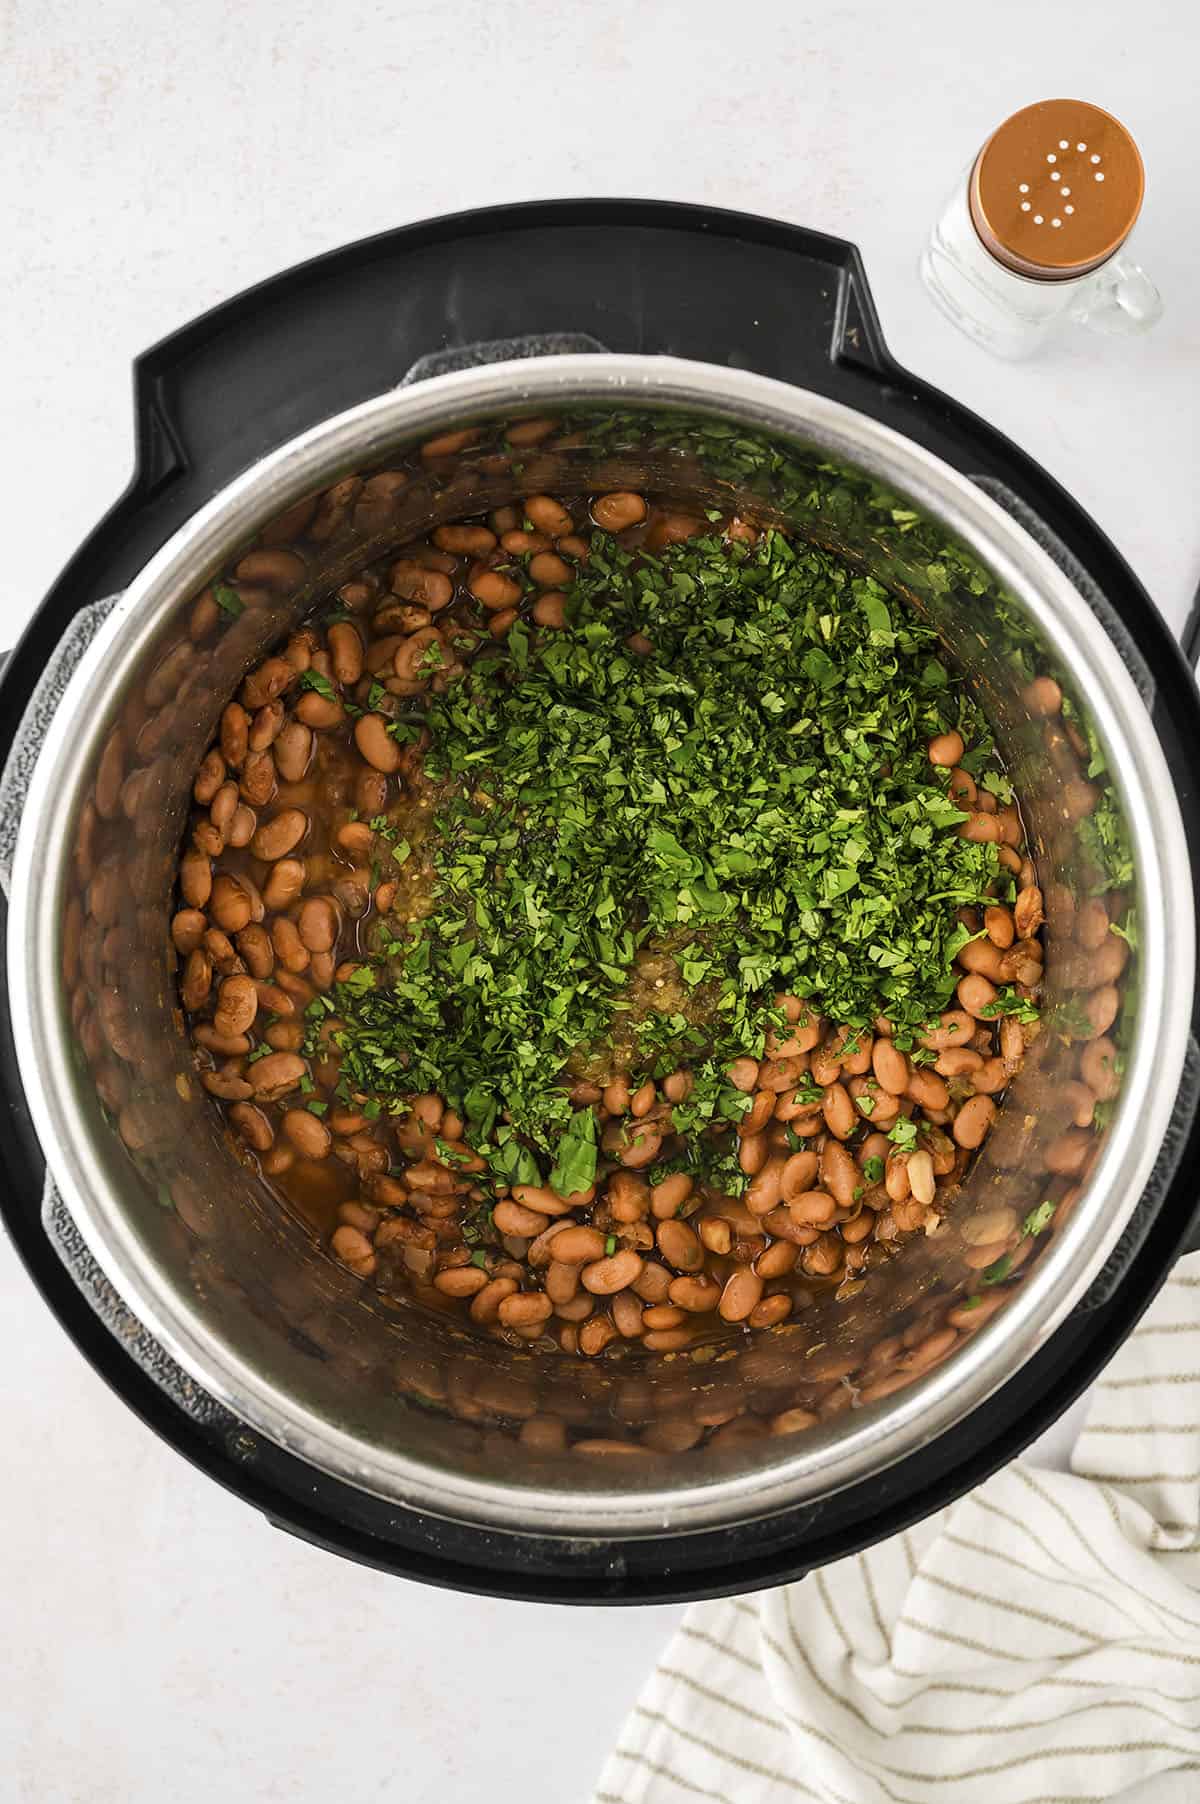 Cilantro added to beans in pressure cooker.